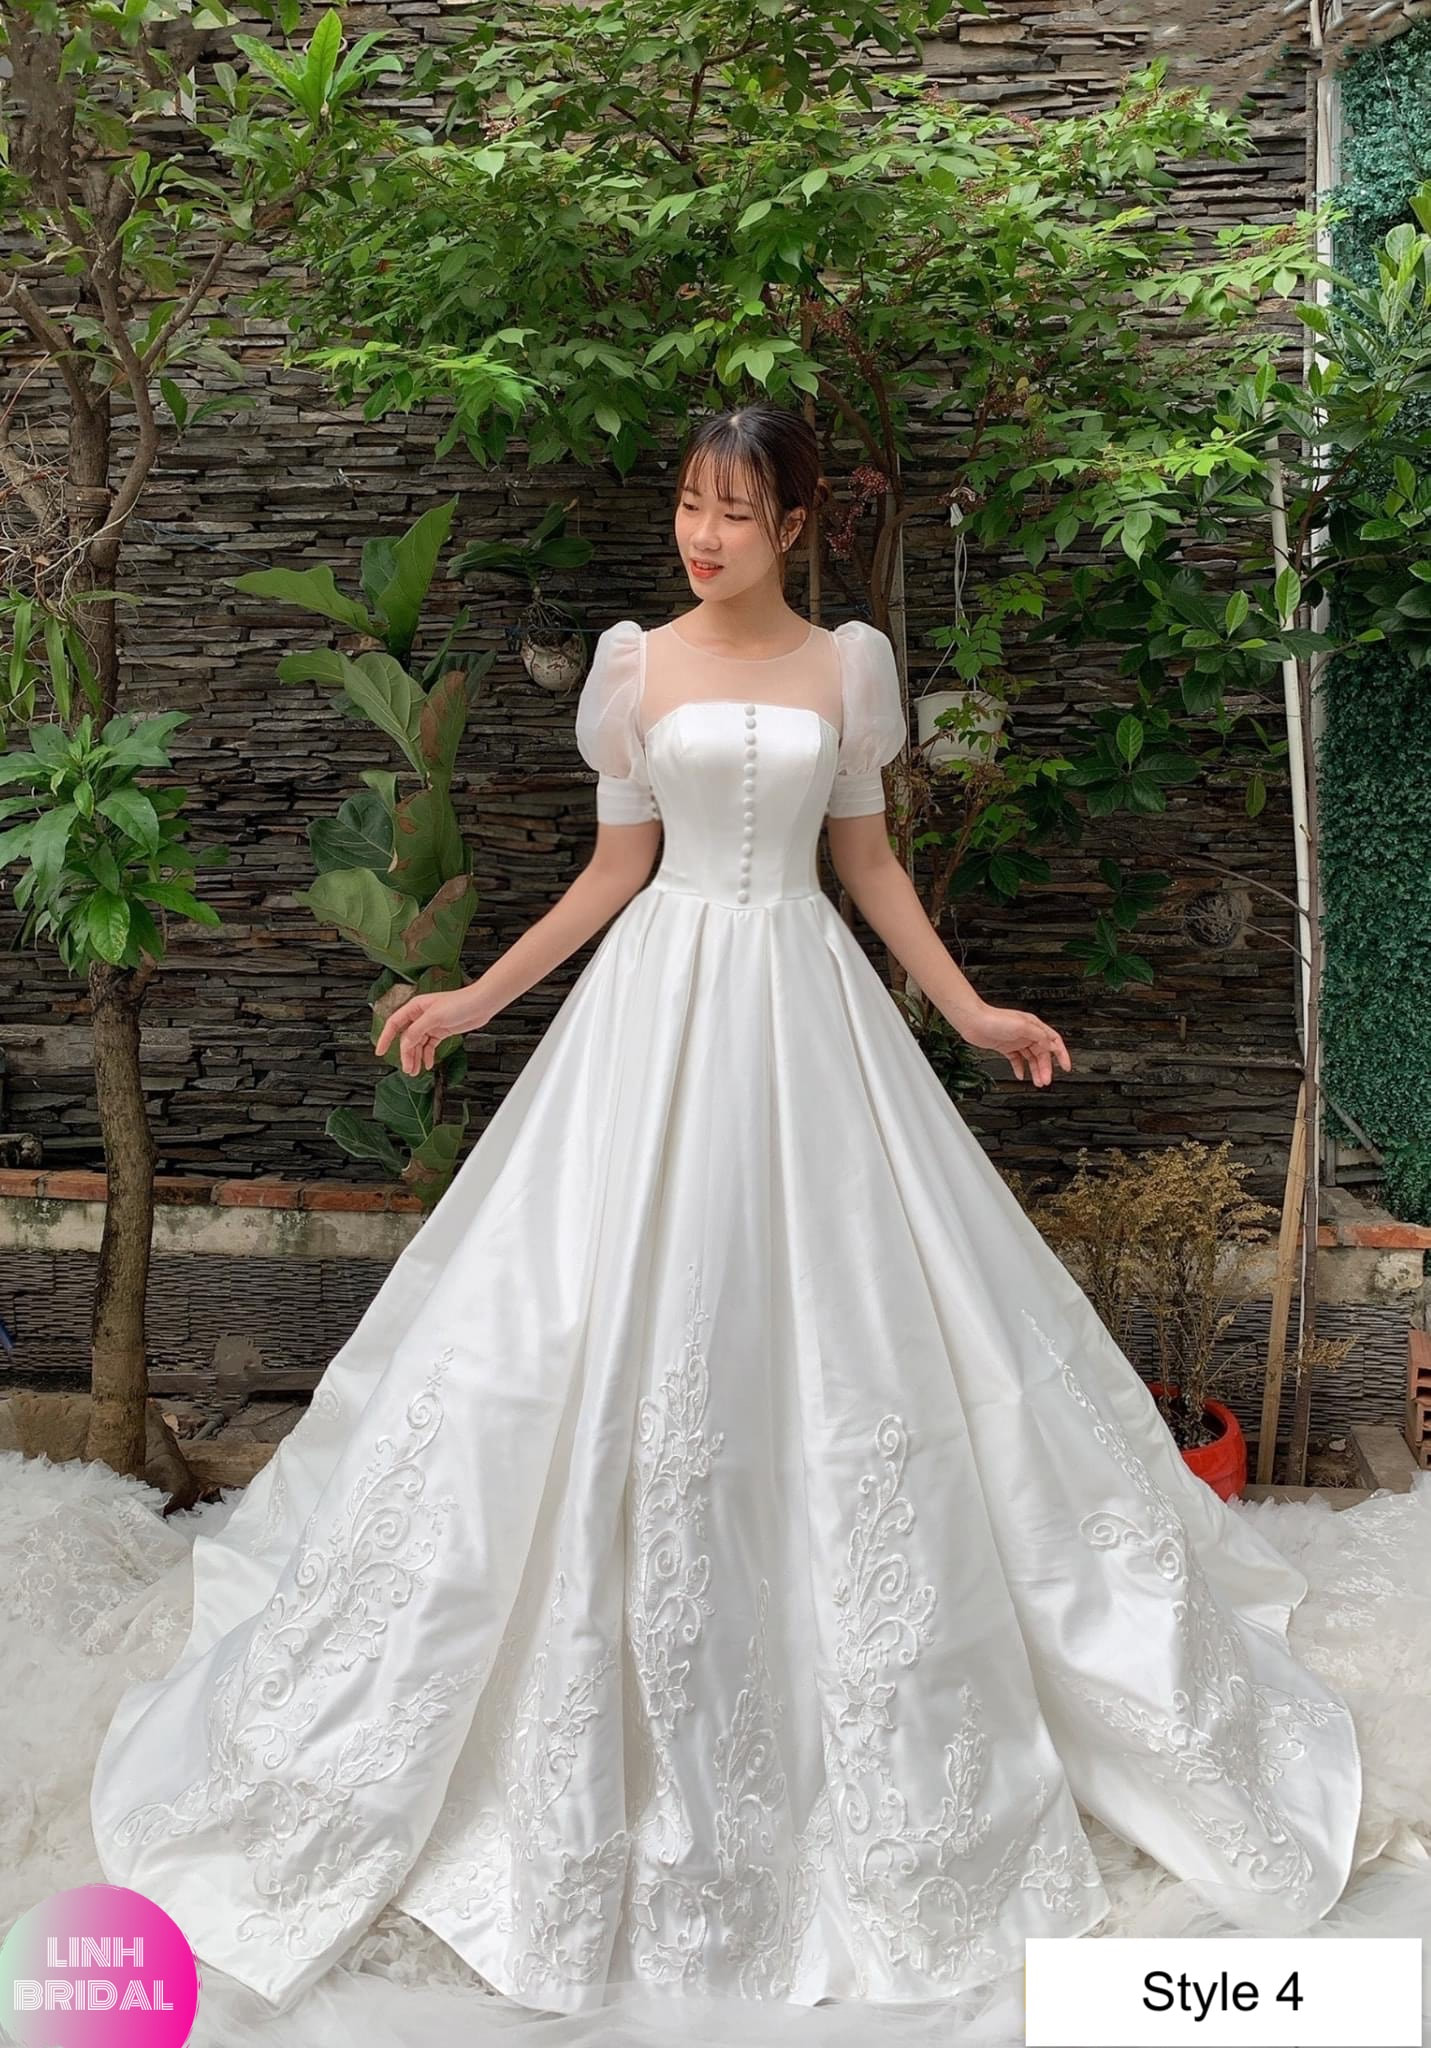 Luxury Off Shoulder Sparkly Ballgown Wedding Dress With Appliqued Lace And  Chapel Train 2019 Designer Bridal G Gown Style 274z From Ouri, $158.8 |  DHgate.Com